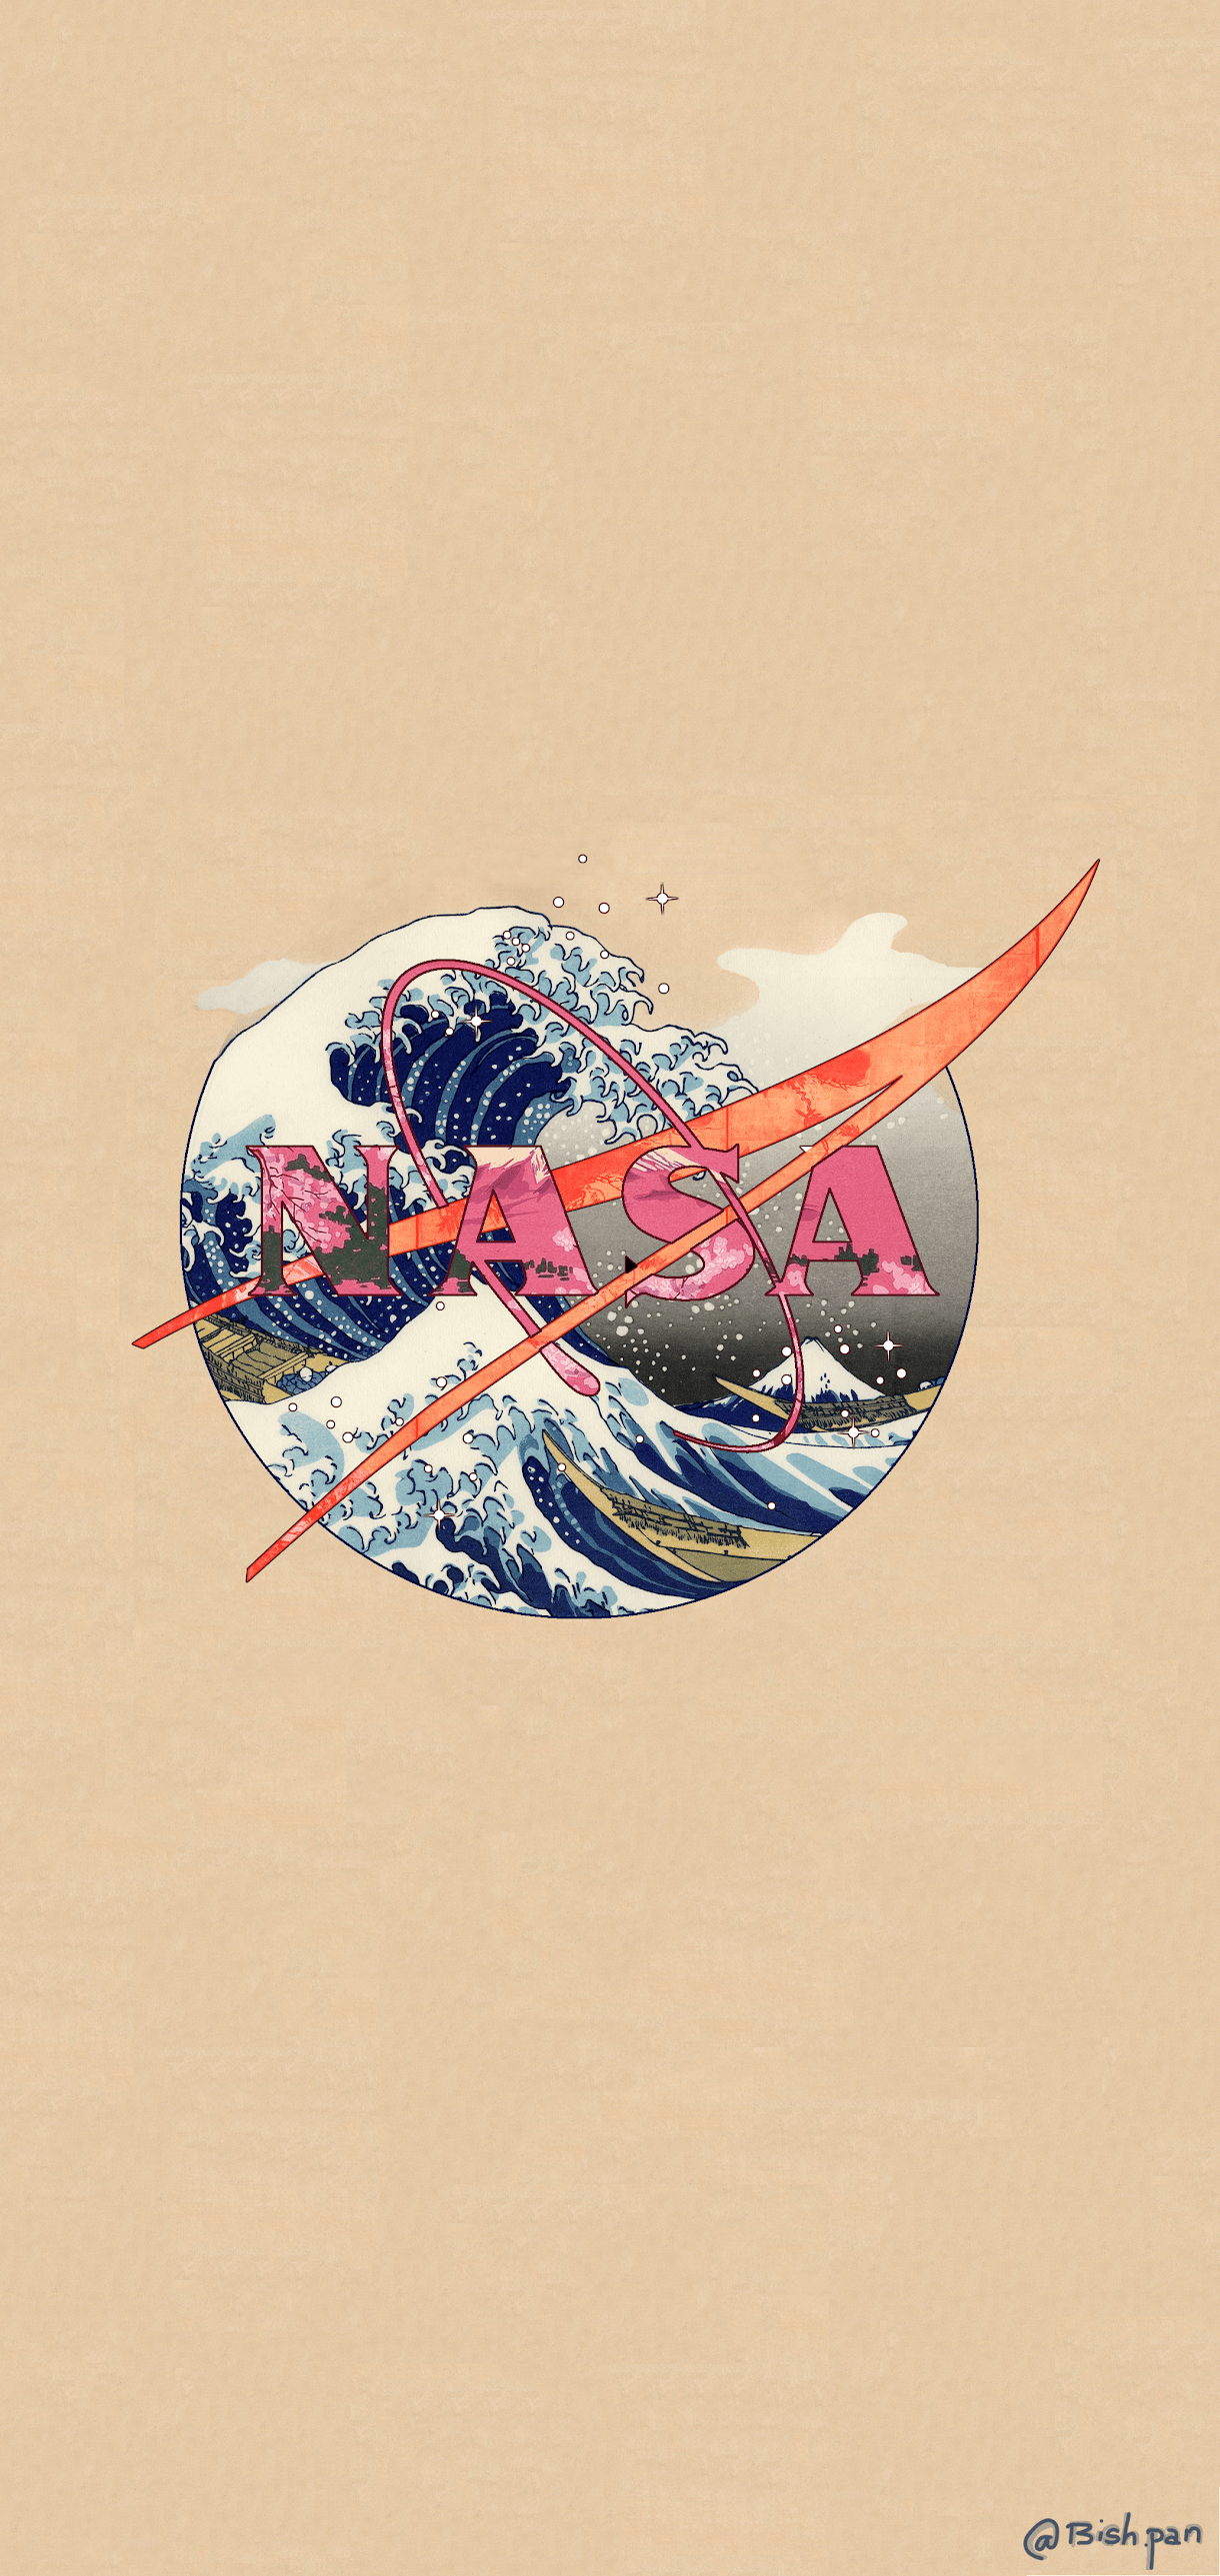 The Great Wave of Kanagawa meets the iconic Nasa logo - Wave, NASA, The Great Wave off Kanagawa